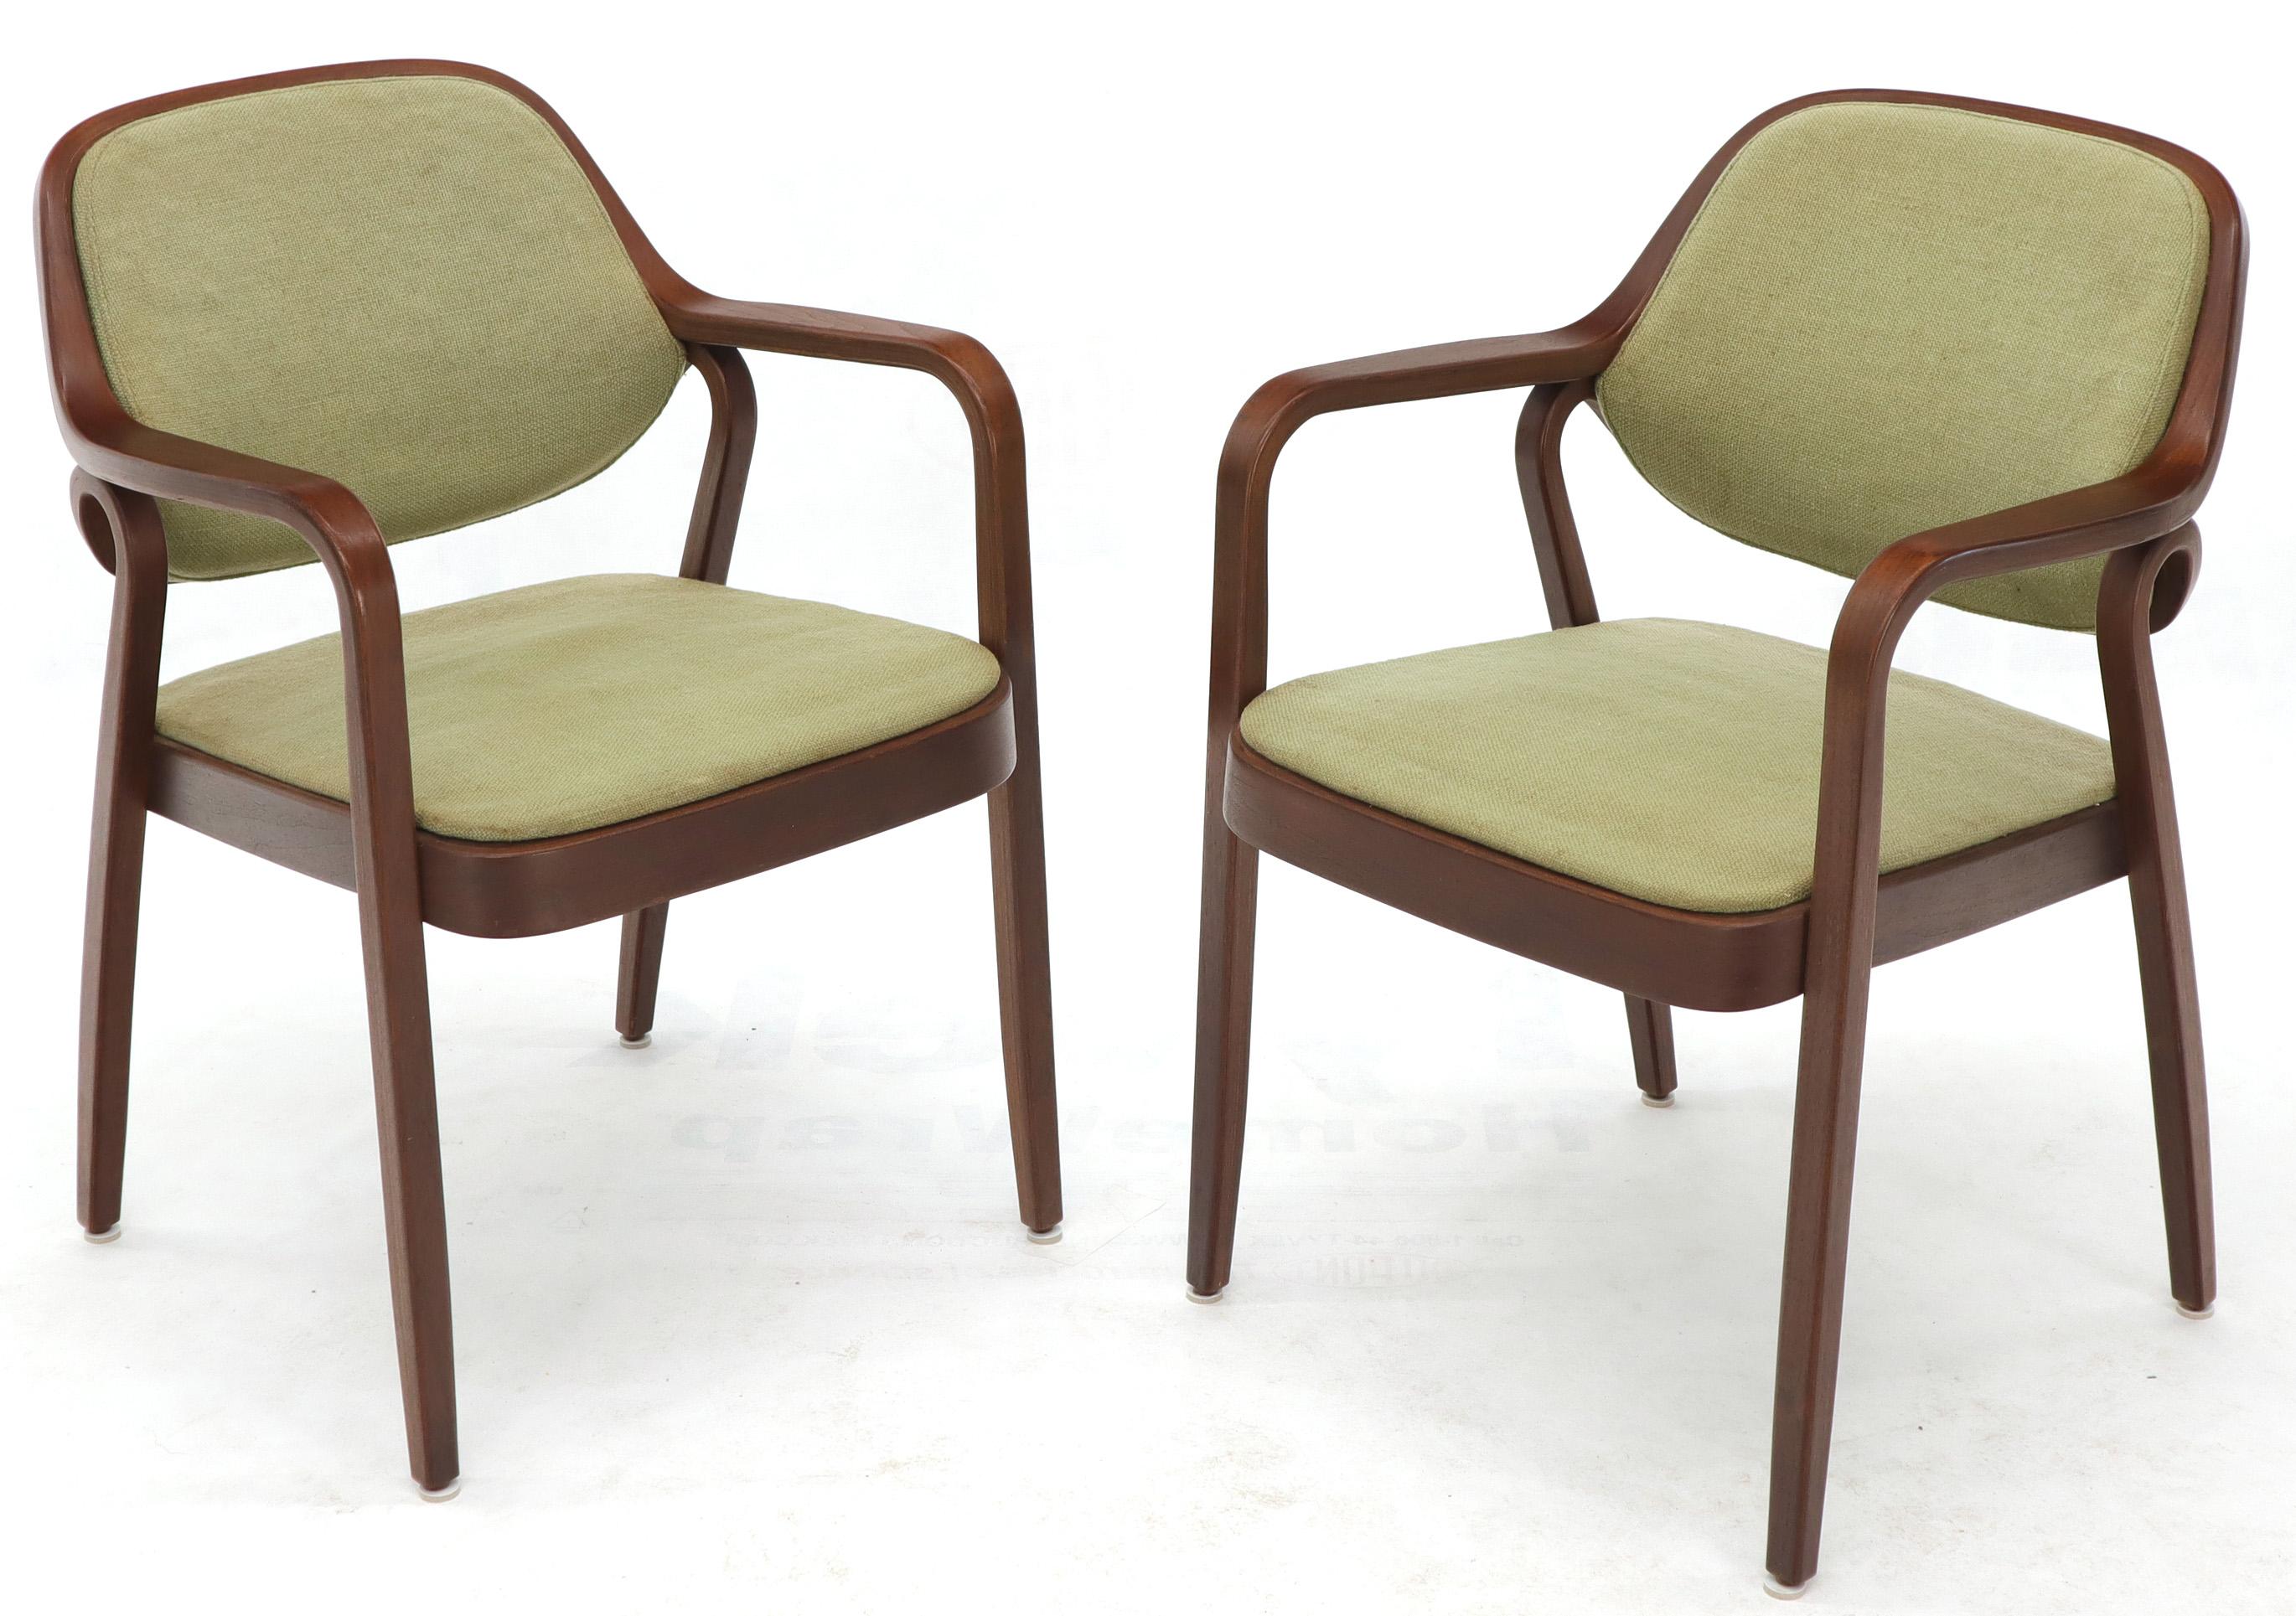 Pair of Mid-Century Modern bent plywood chairs for Knoll.